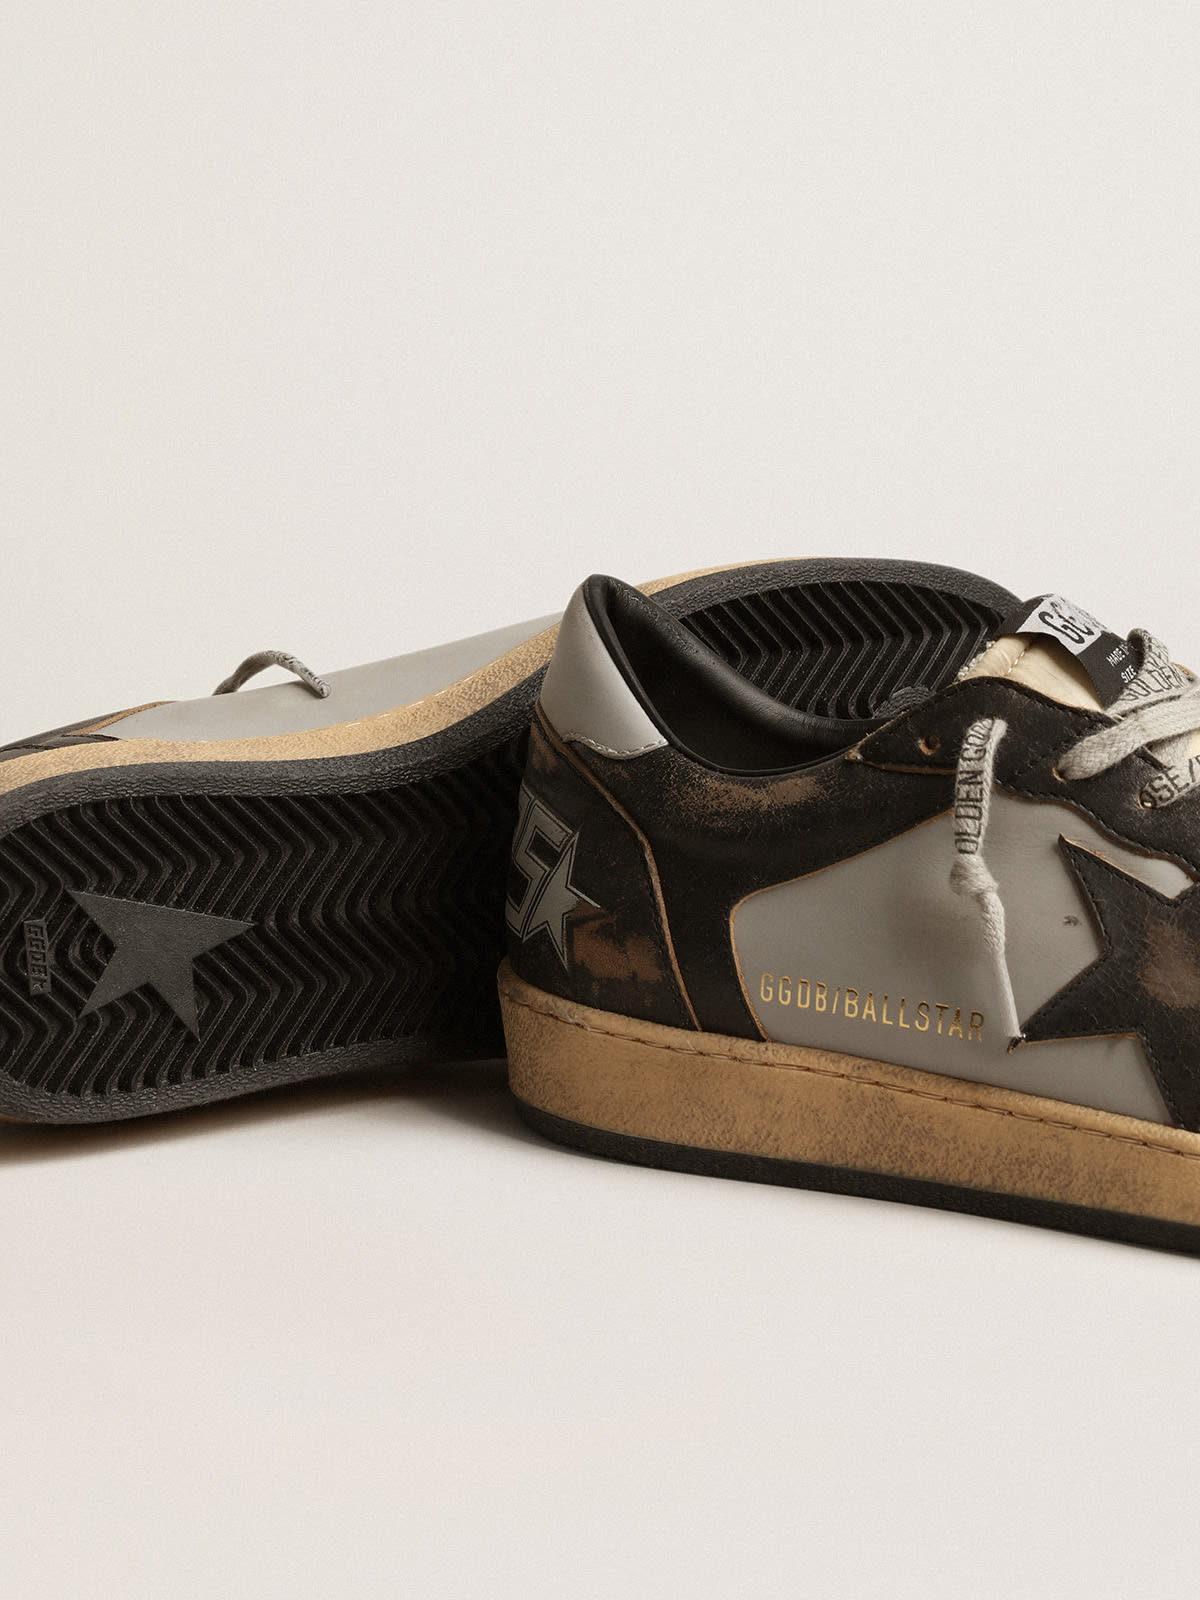 Golden Goose - Ball Star in gray and black leather with black star in 